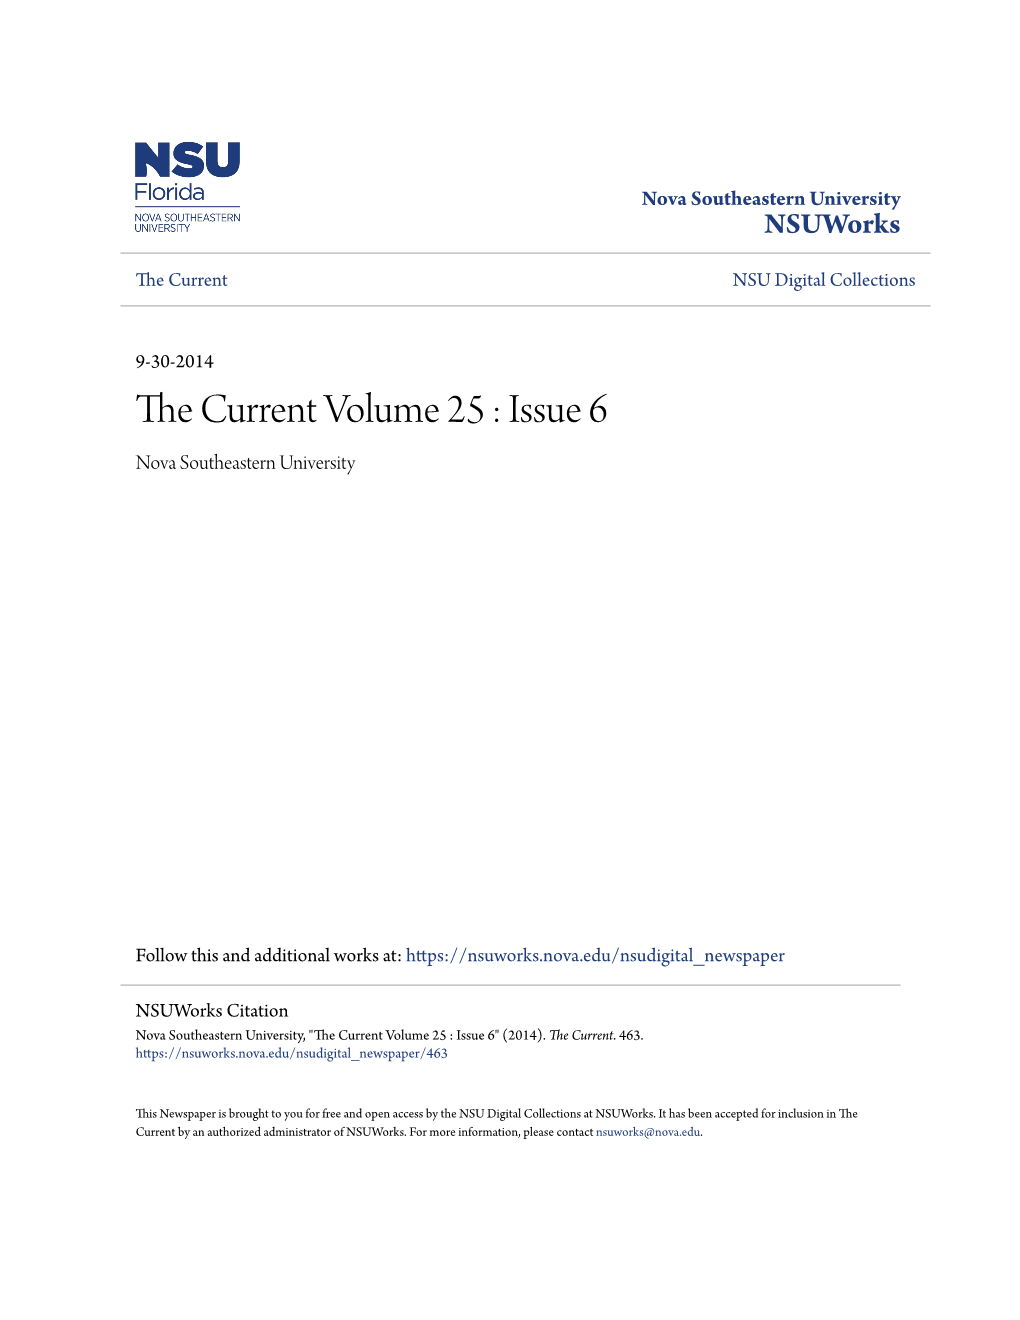 The Current Volume 25 : Issue 6